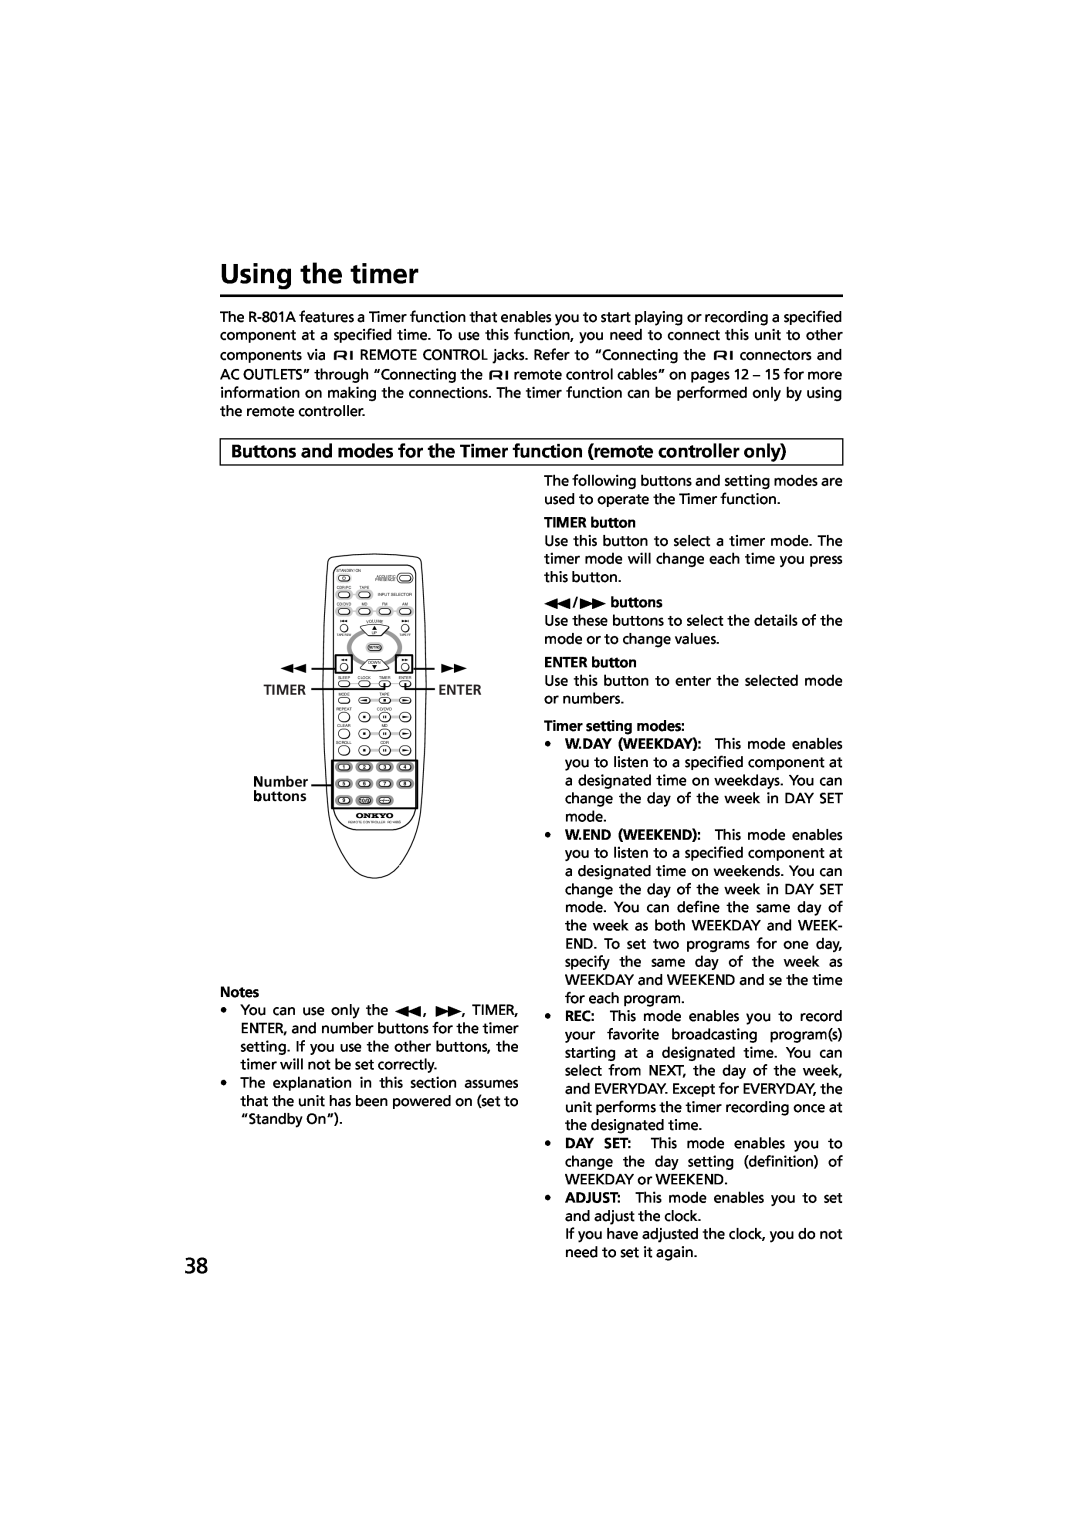 Onkyo R-801A instruction manual Using the timer, TIMER button, buttons, Timer setting modes, ENTER button 